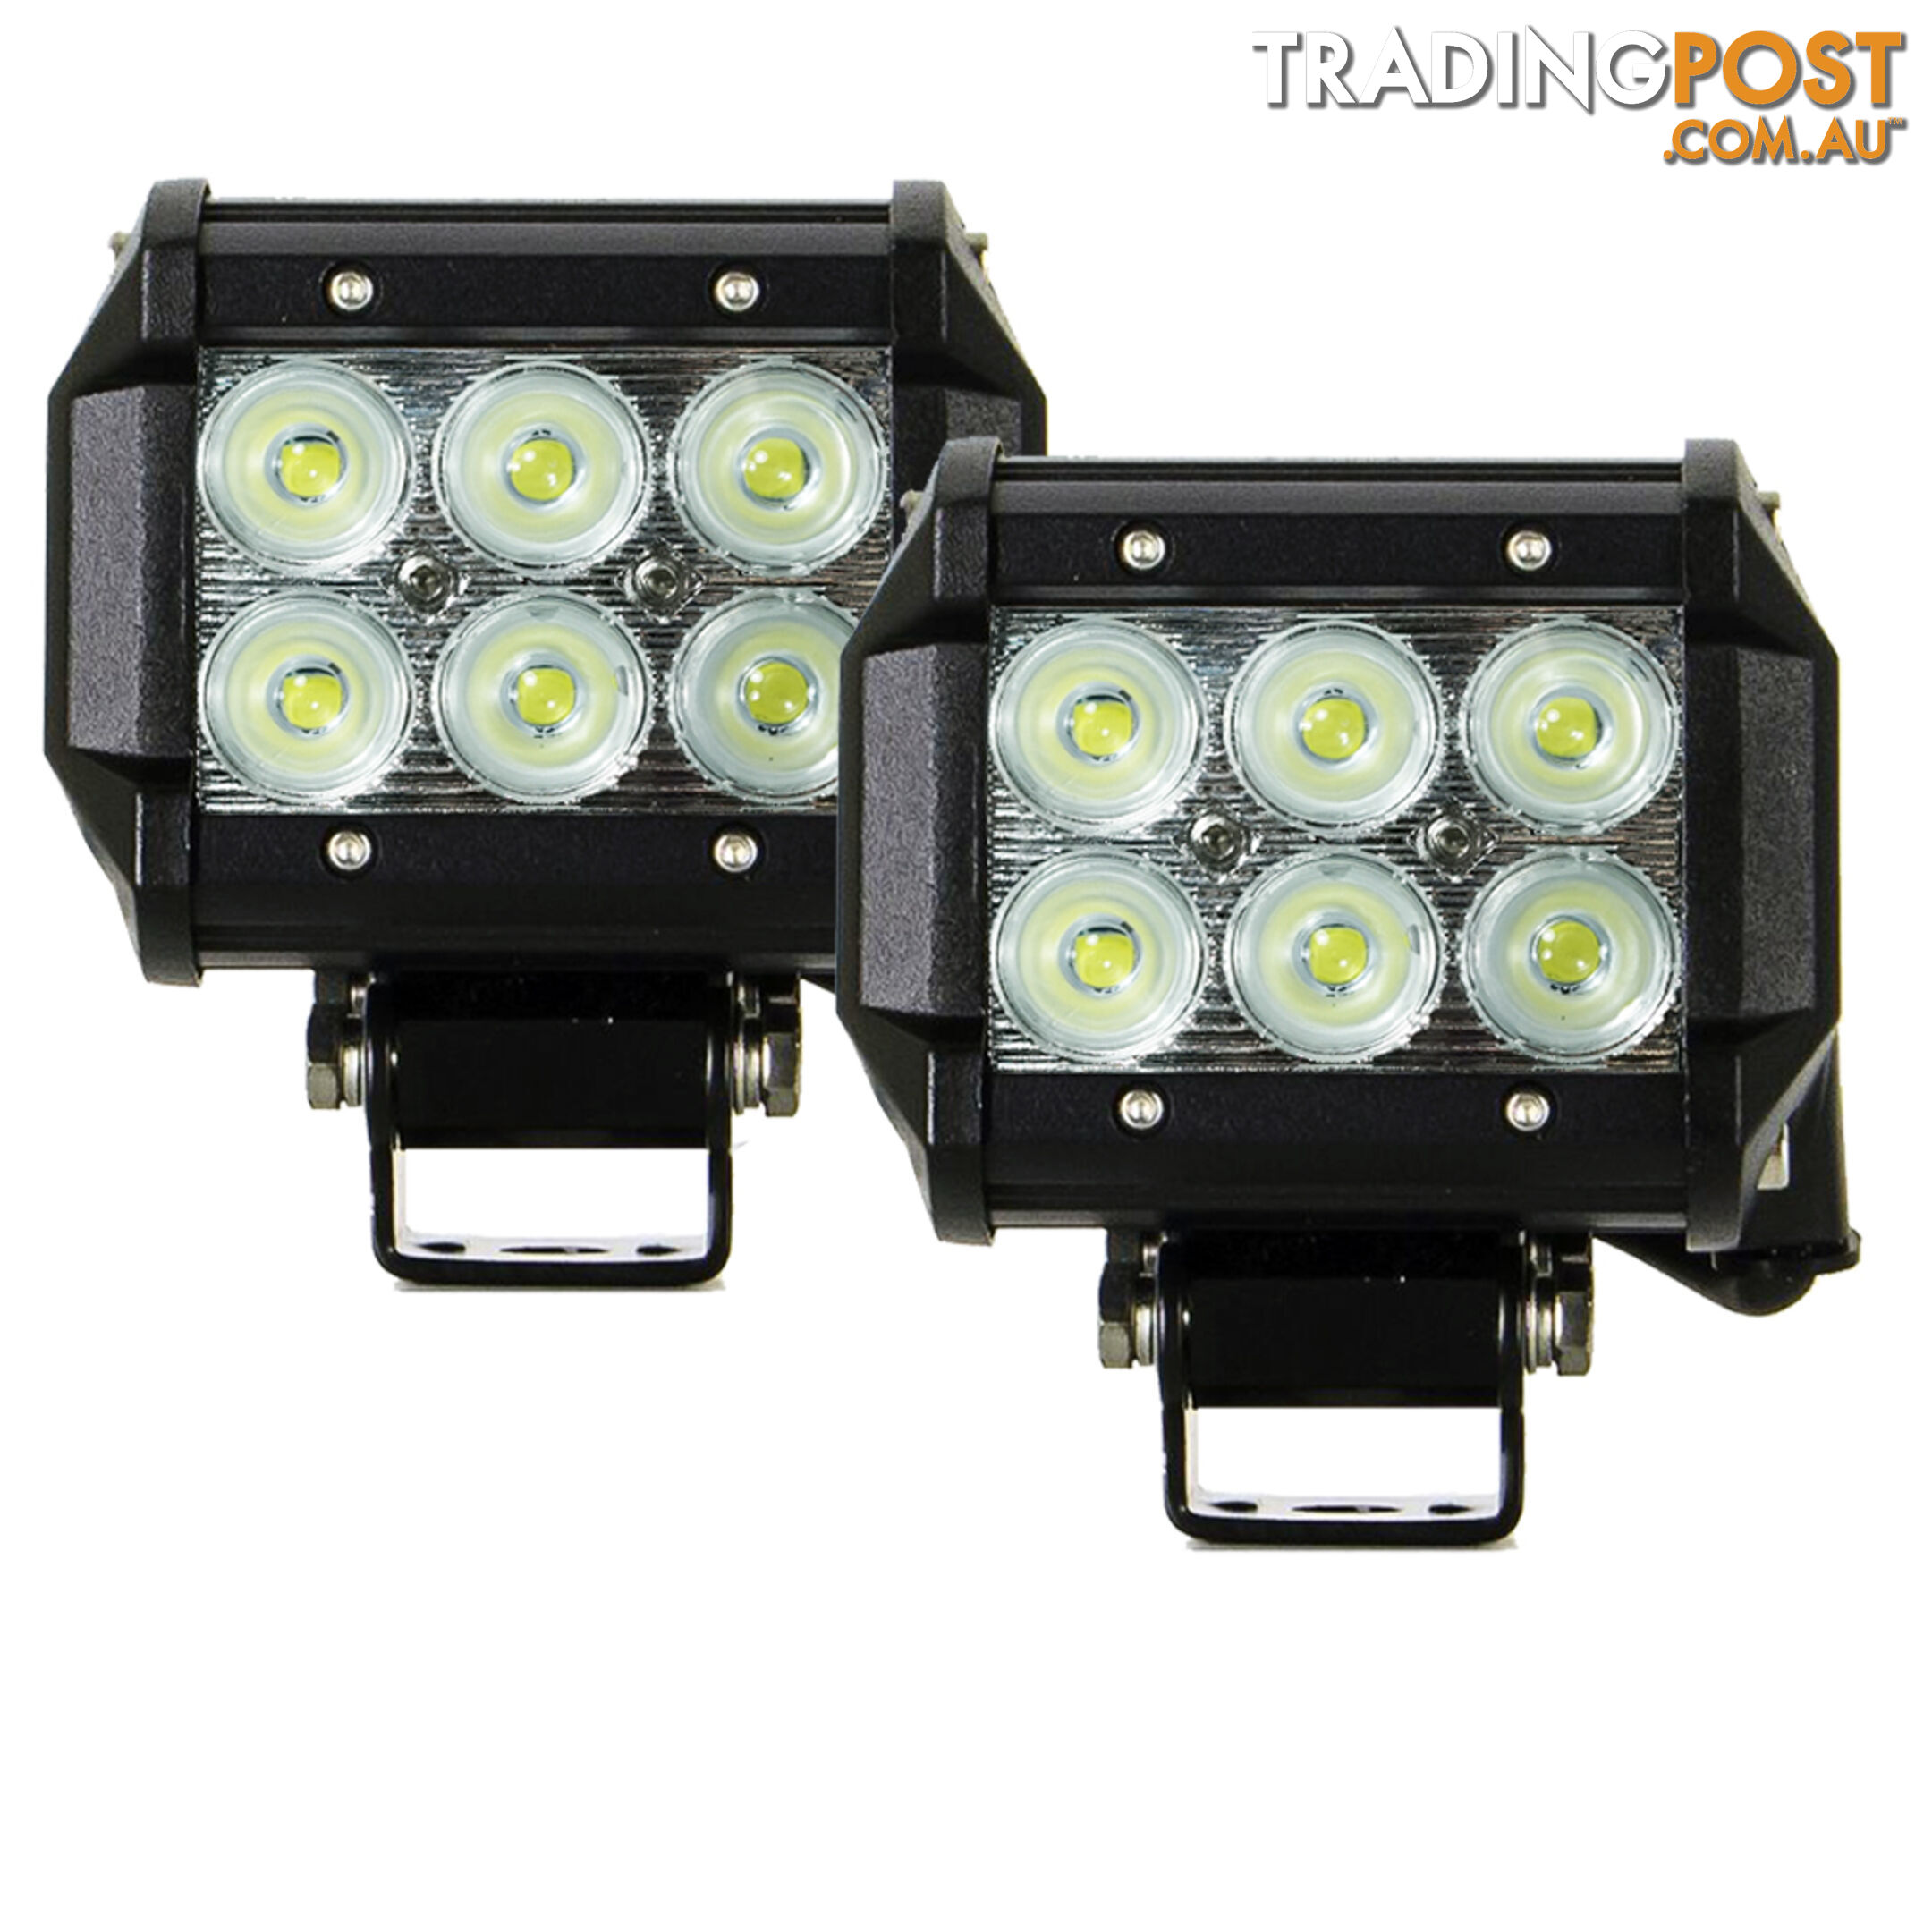 2x 4inch 30W Cree LED Light Bar Flood Work Driving Offroad Lamp Save On 42W